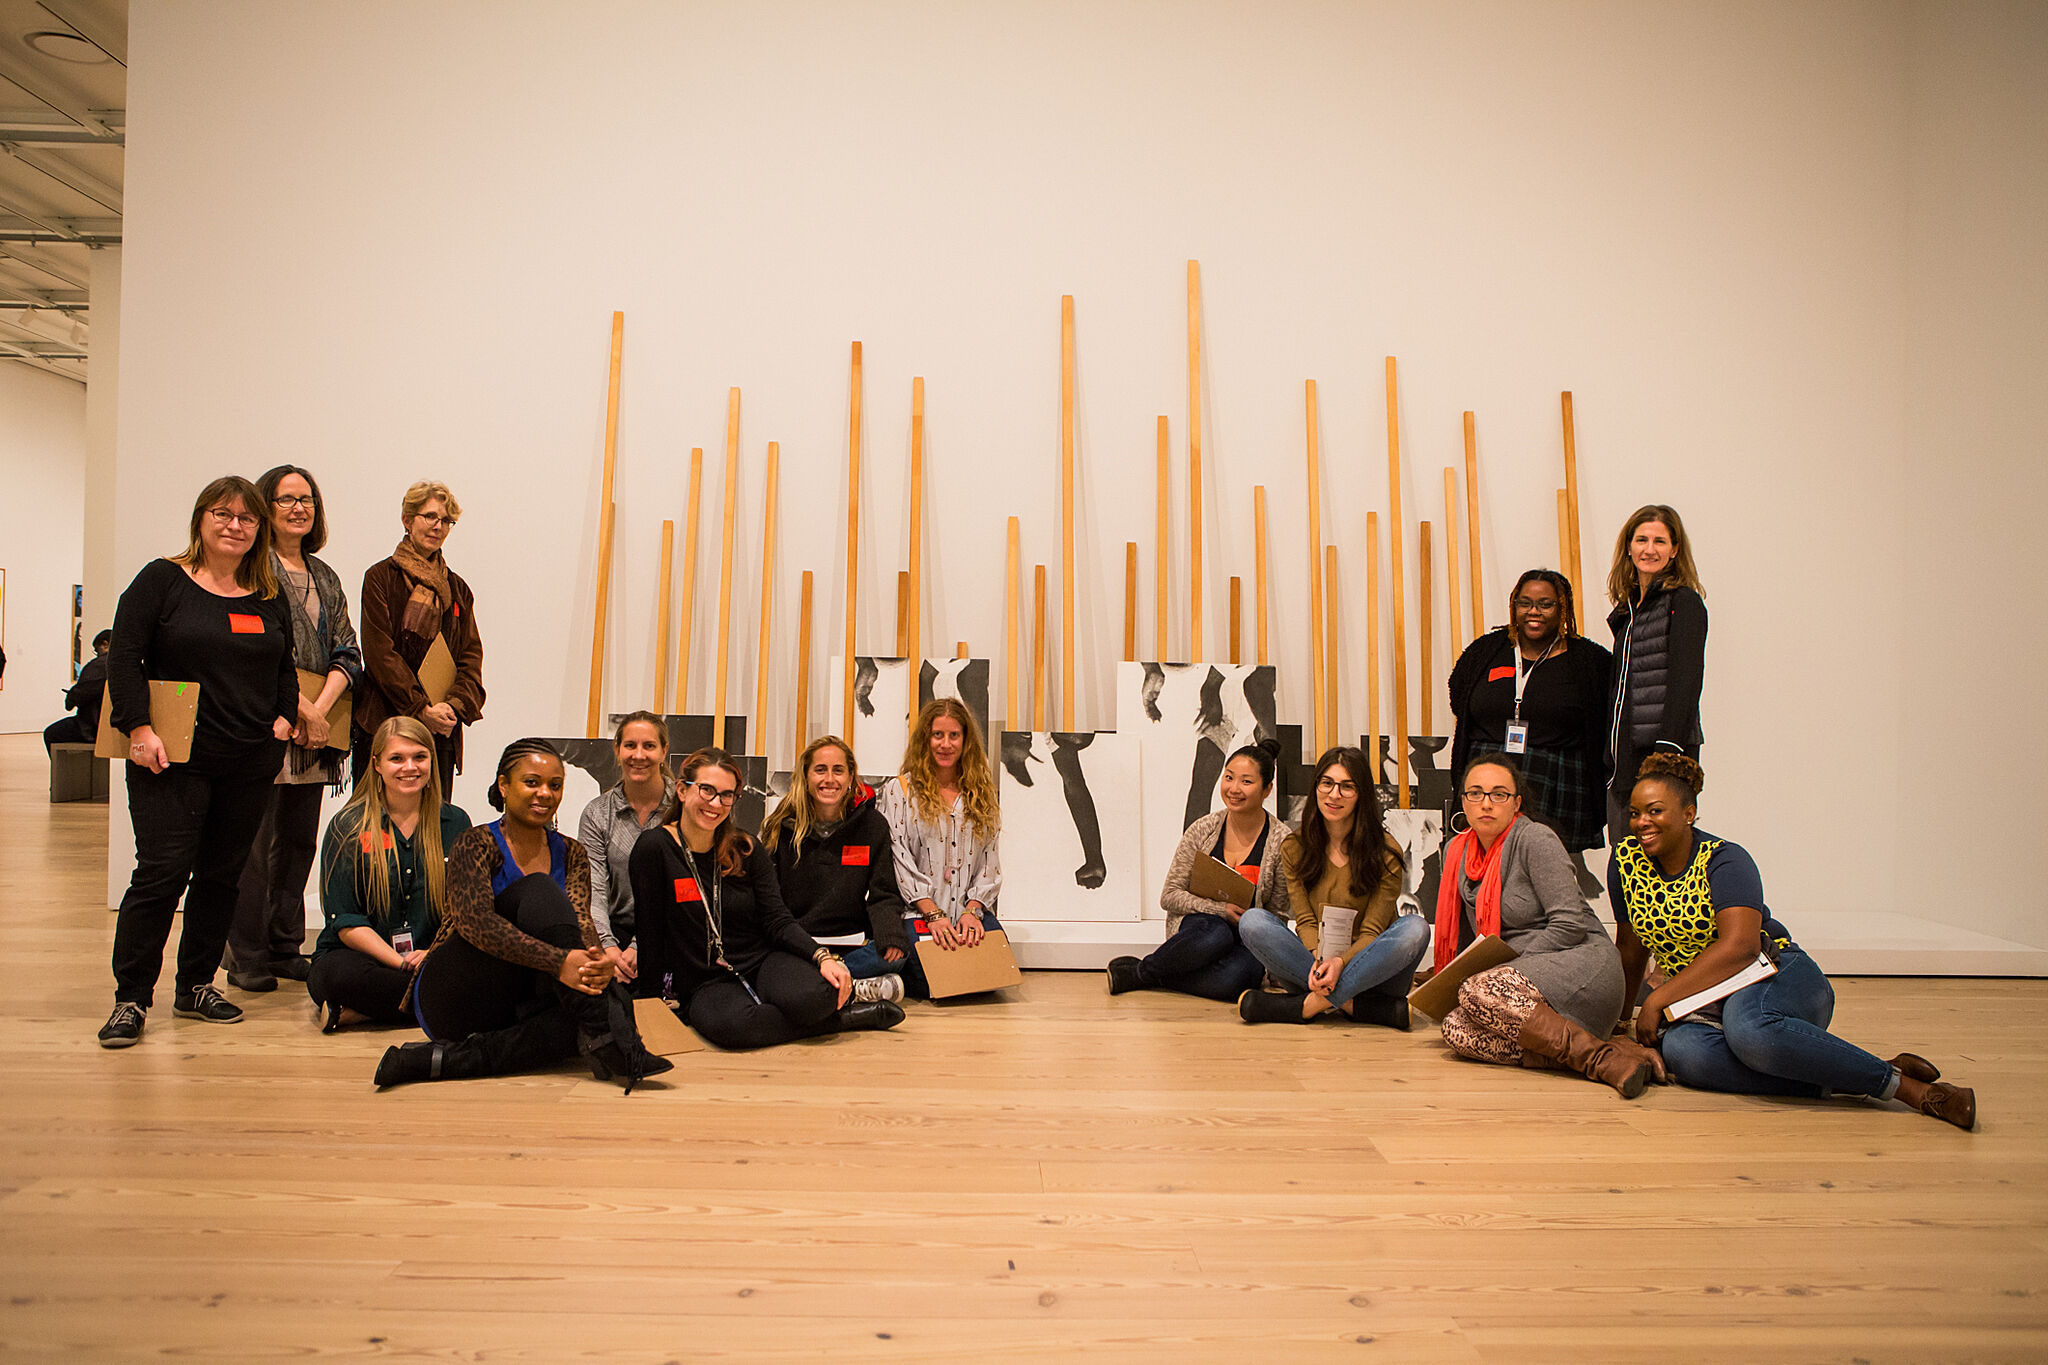 A group photo of teachers in a gallery